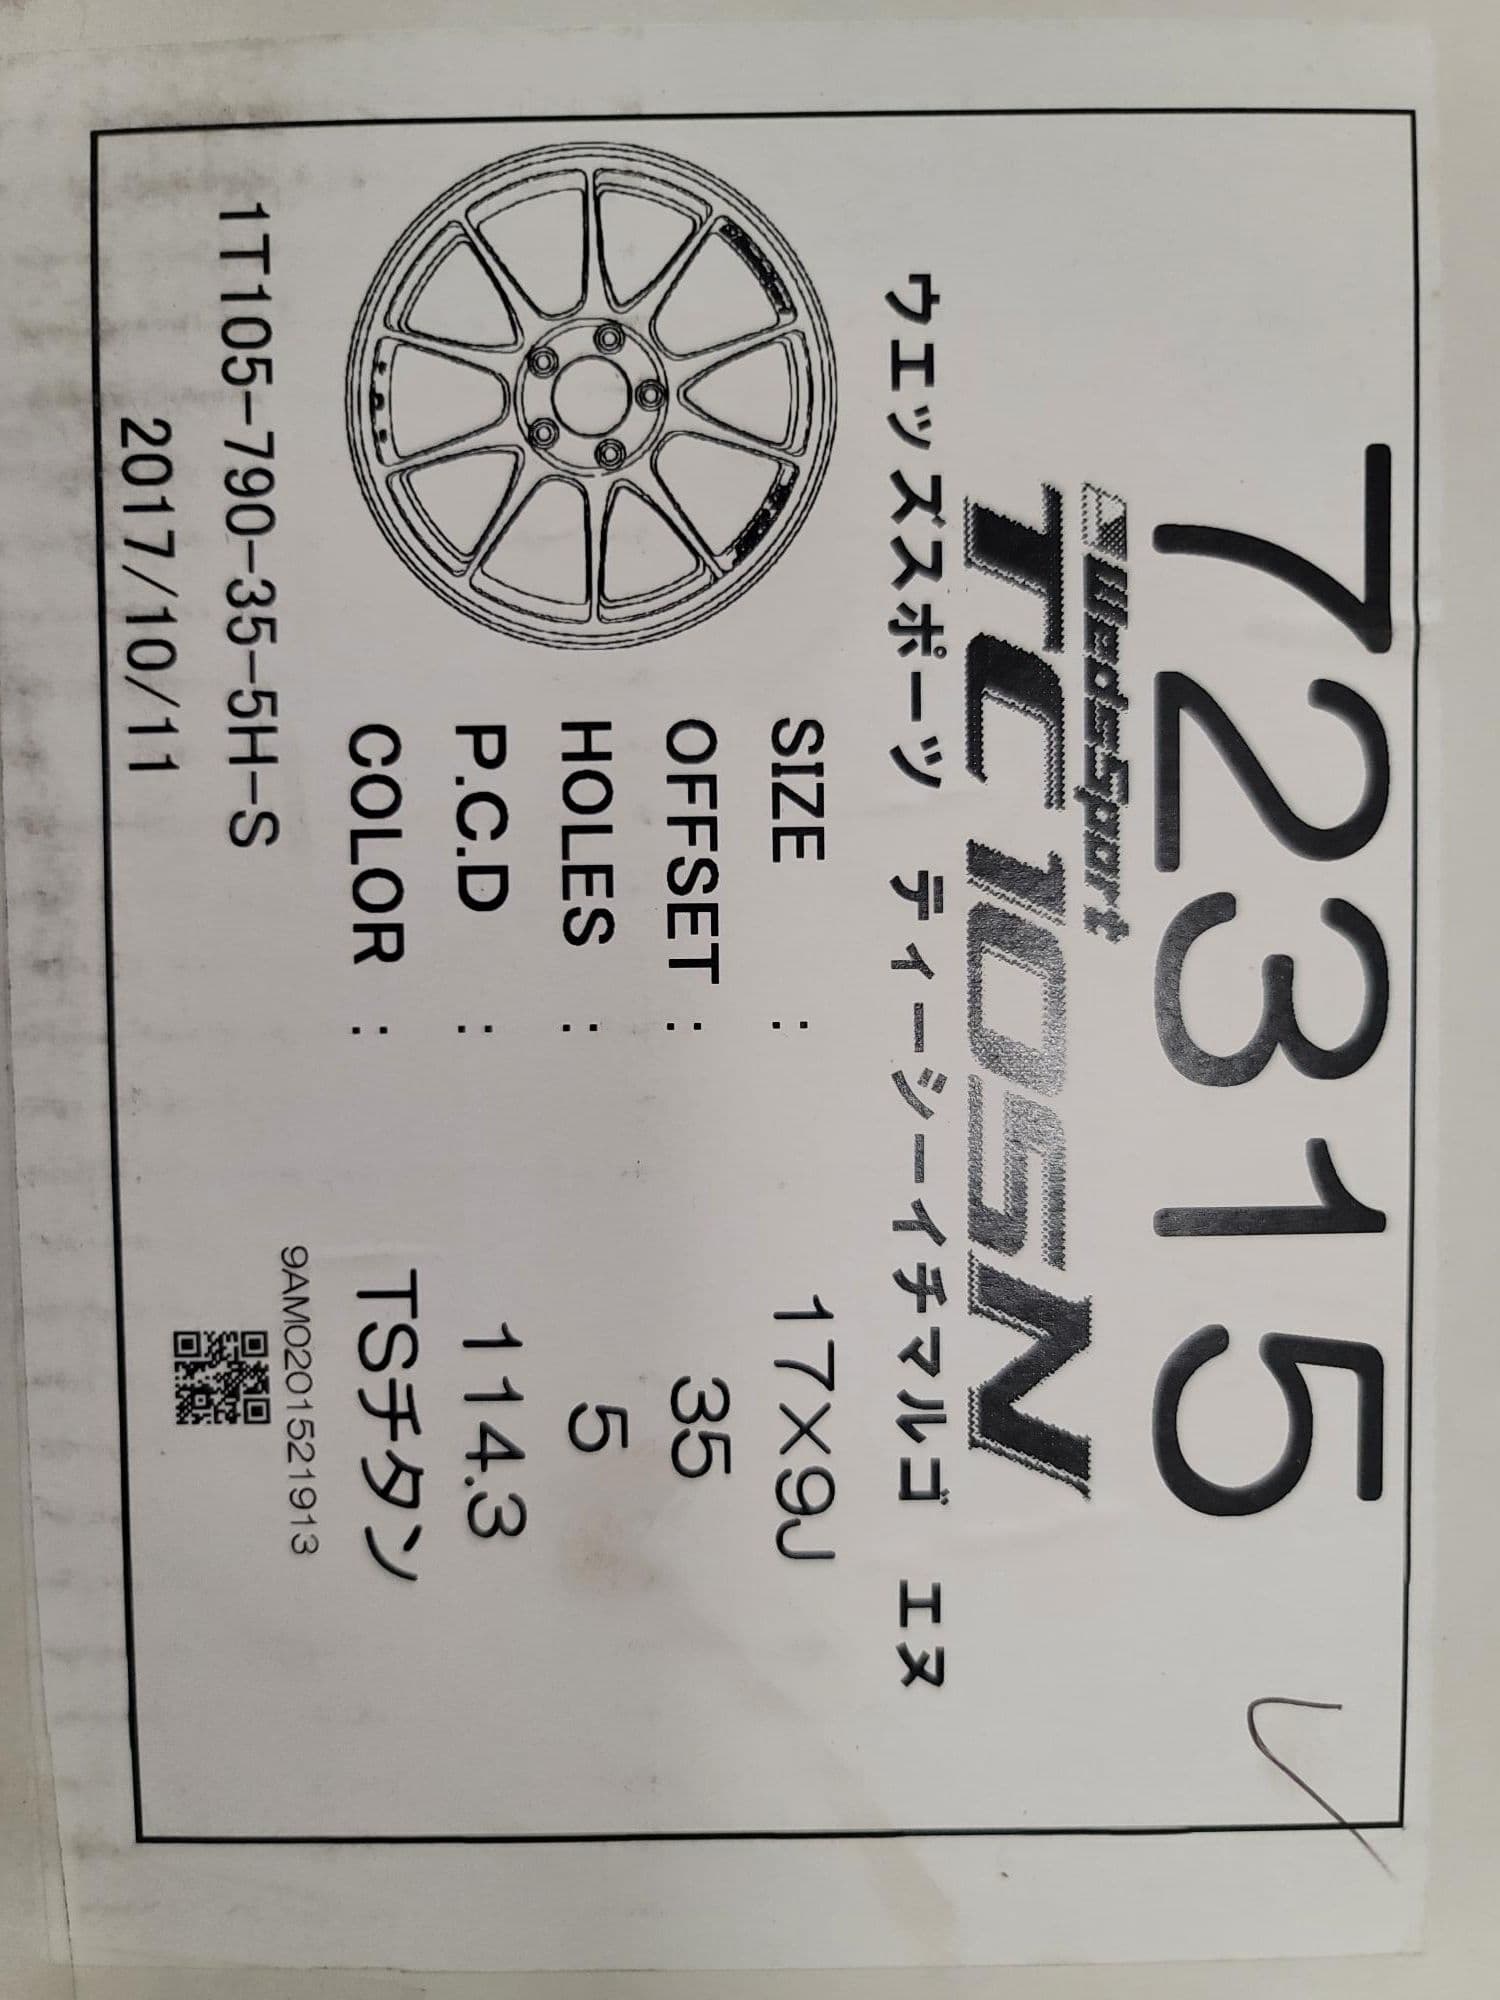 Wheels and Tires/Axles - WedsSport TC105N wheels for FD3S and others - New - 1993 to 1995 Mazda RX-7 - Miami, FL 33126, United States